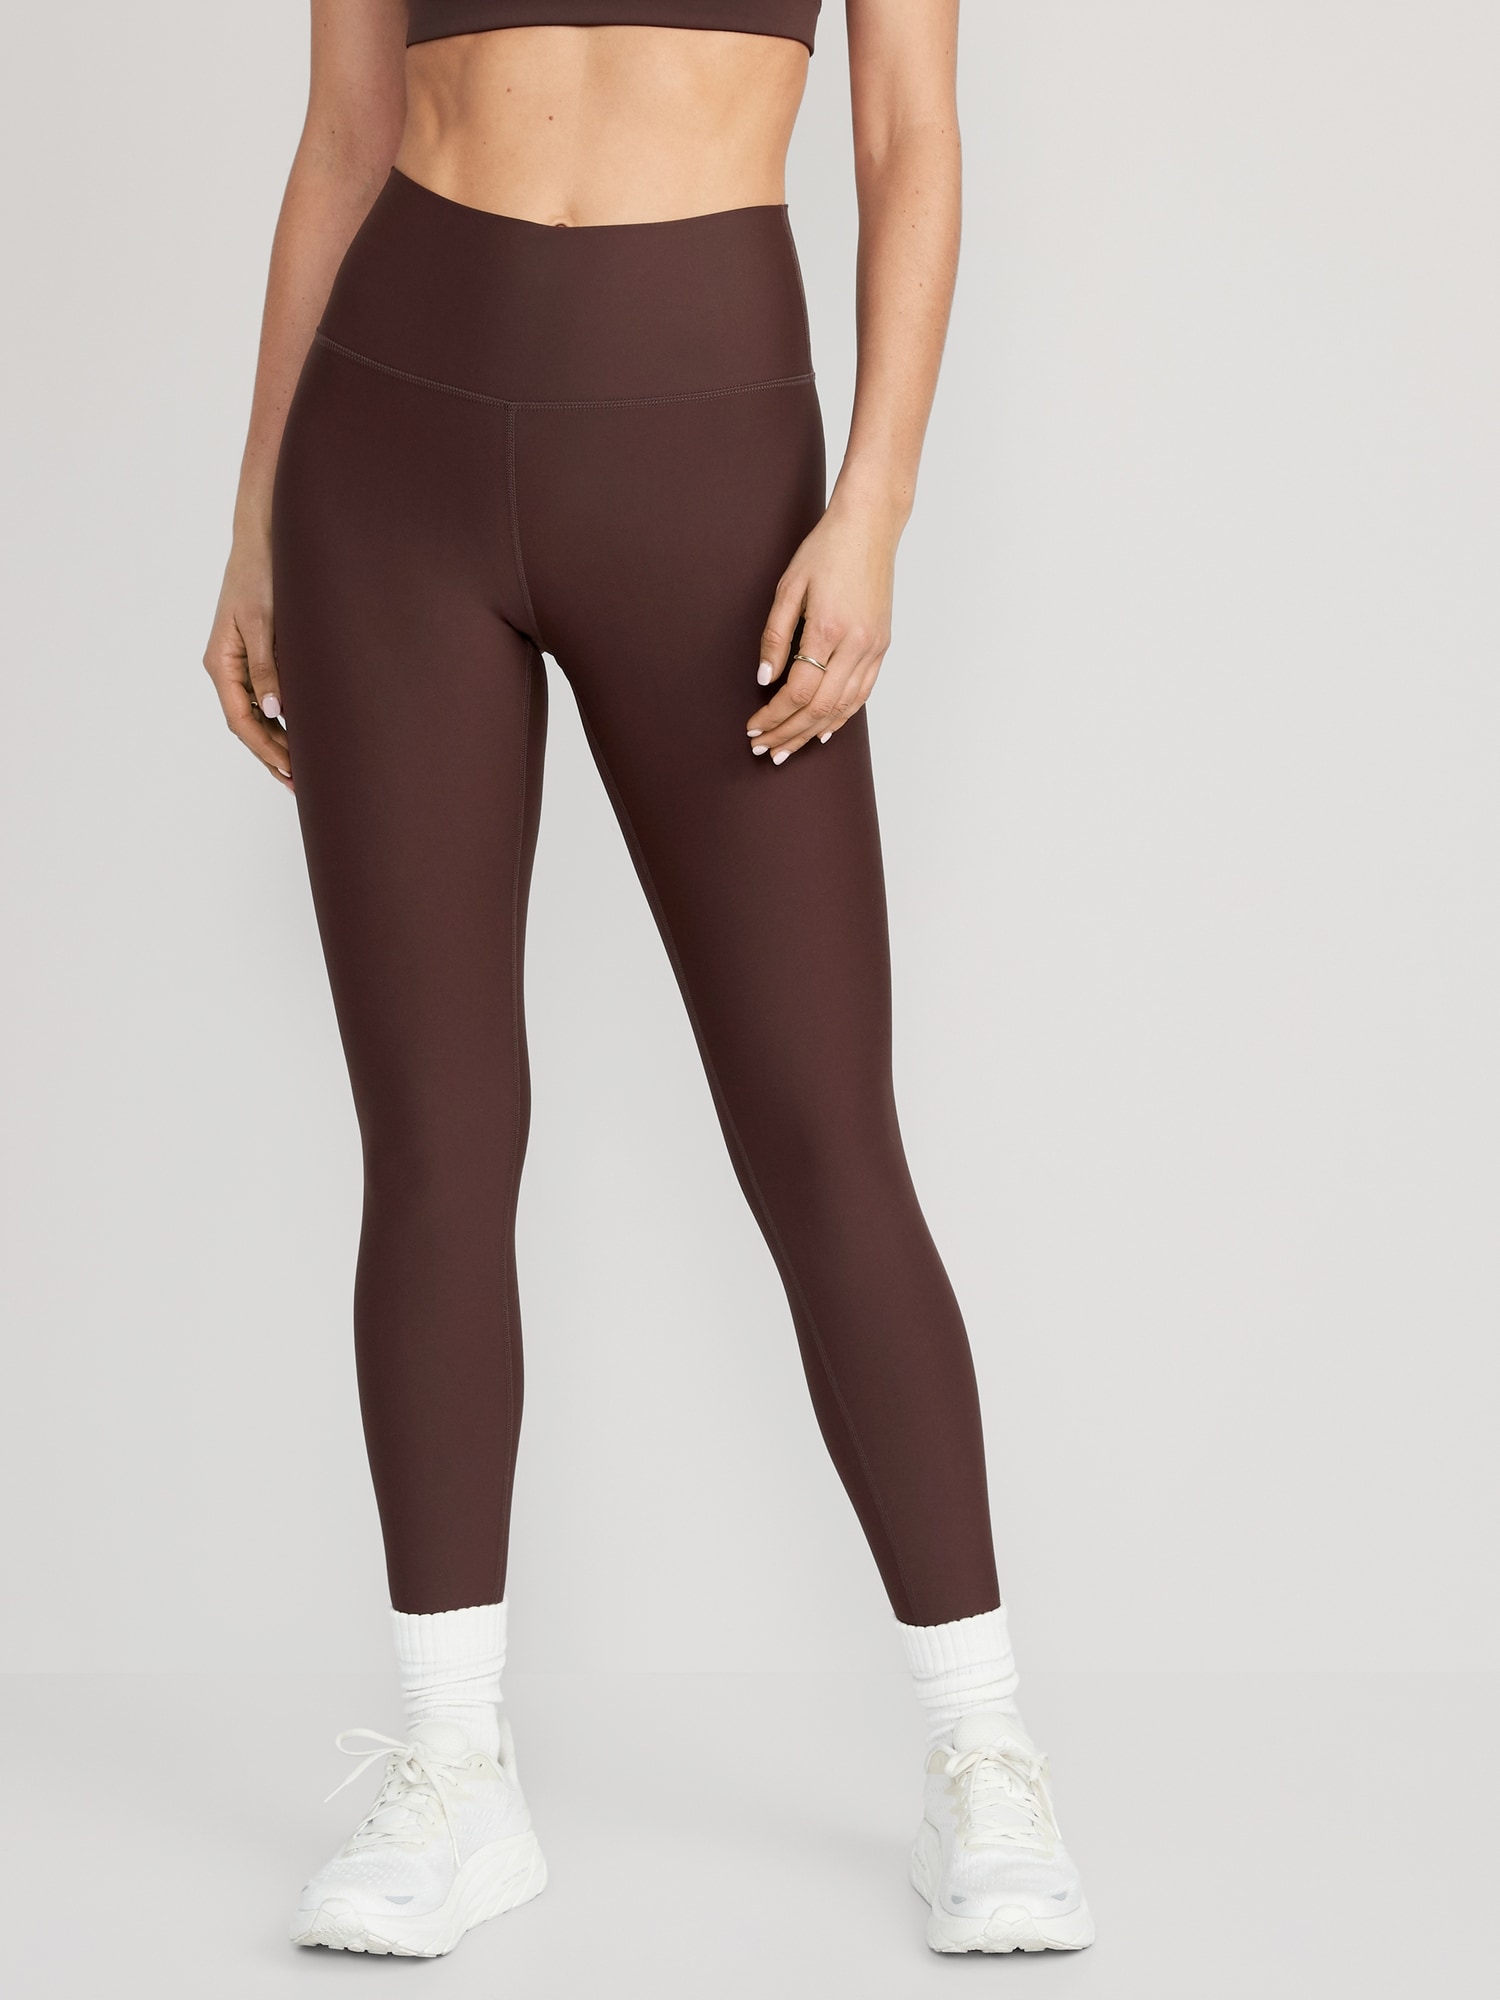 Today Only (9/08) at Old Navy** $10/12 Compression Leggings for Girls and  Women. $10/12 Active Pants for Boys and Men. - Destiny USA